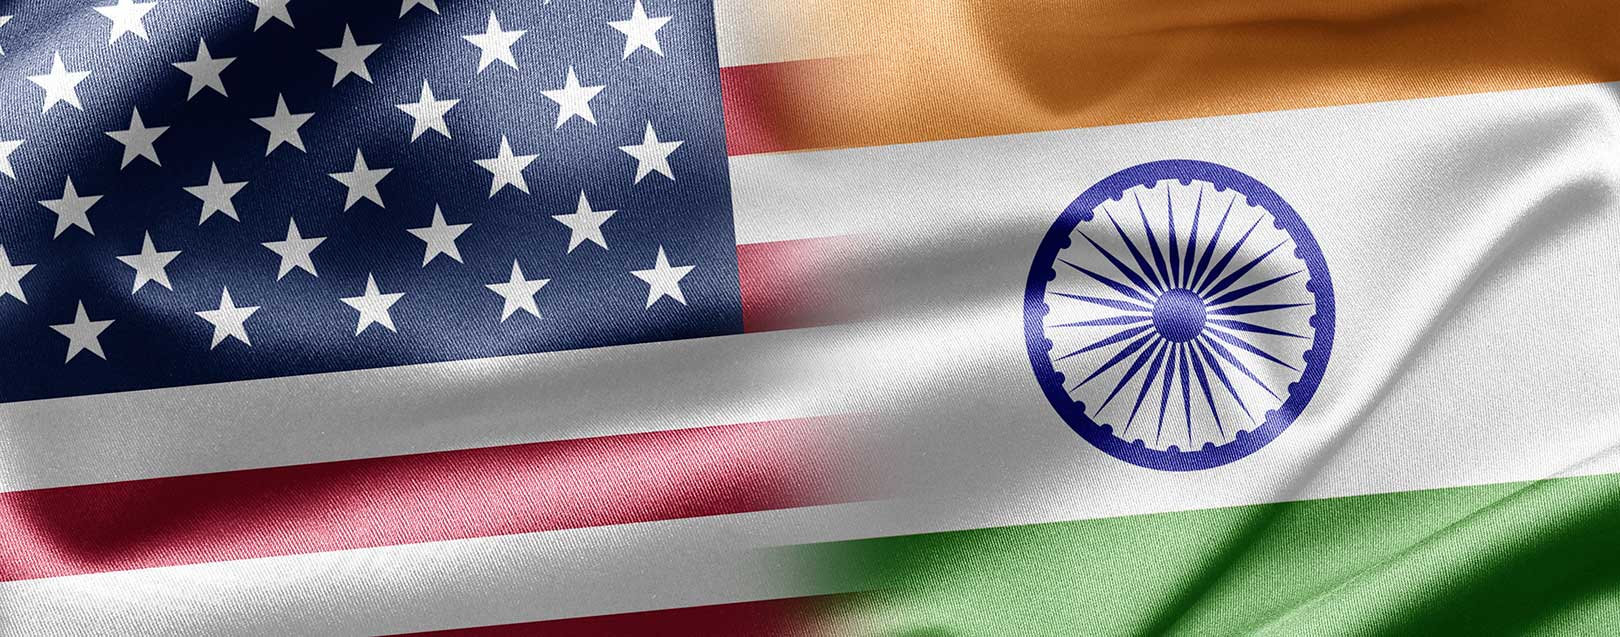 US’ exports to India up 18.7%, trade deficit down 5.9%; still concerns over tariffs